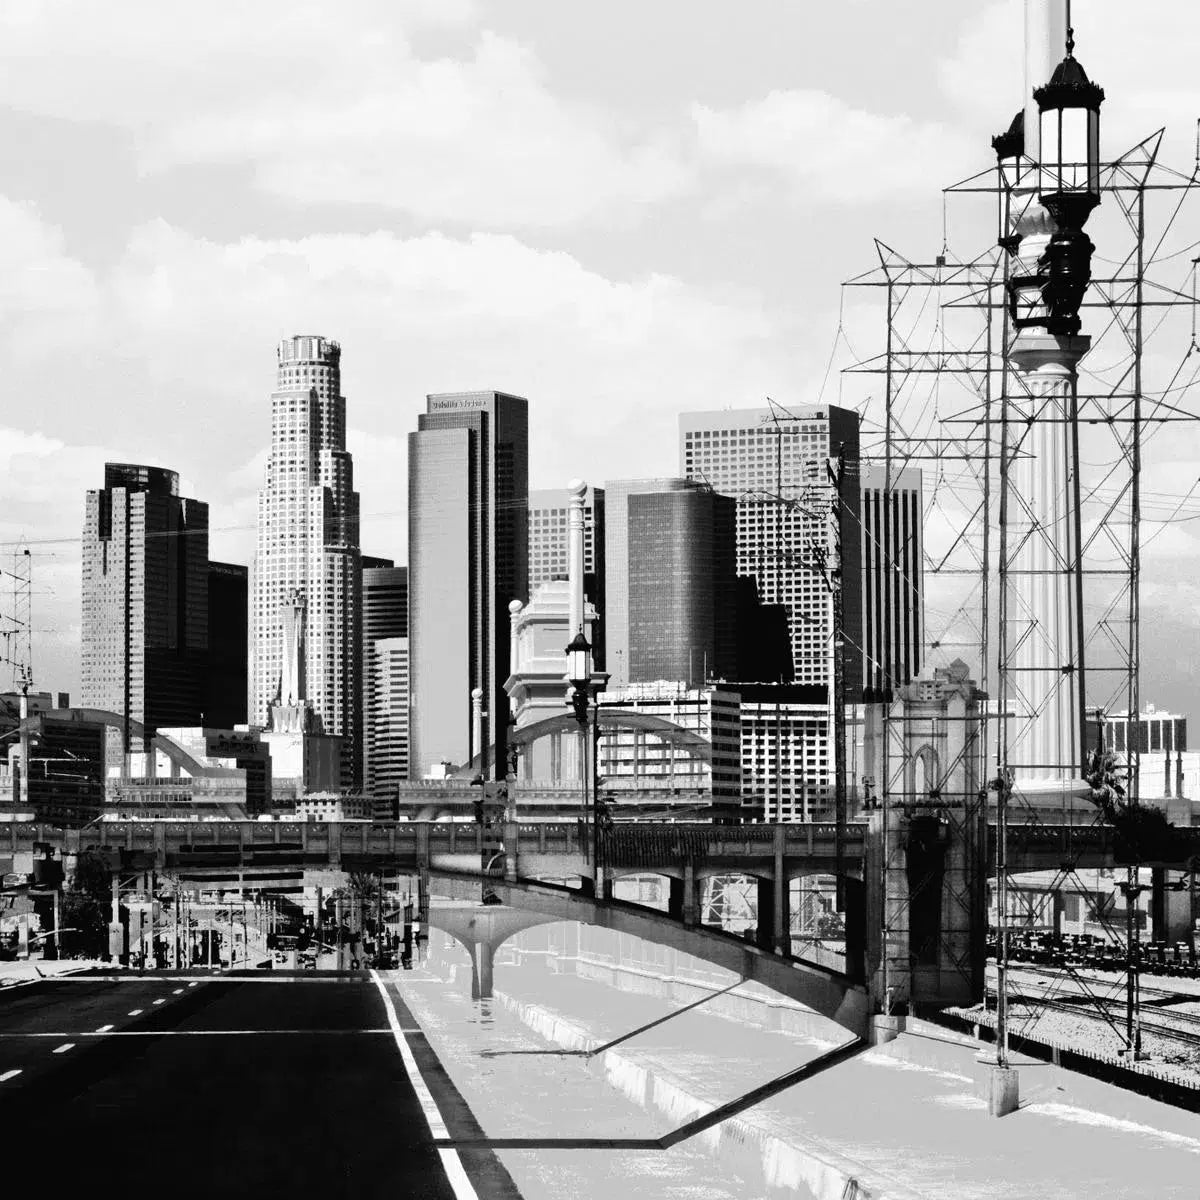 LA Skyline and Lamps BW, by Anyes Galleani-PurePhoto